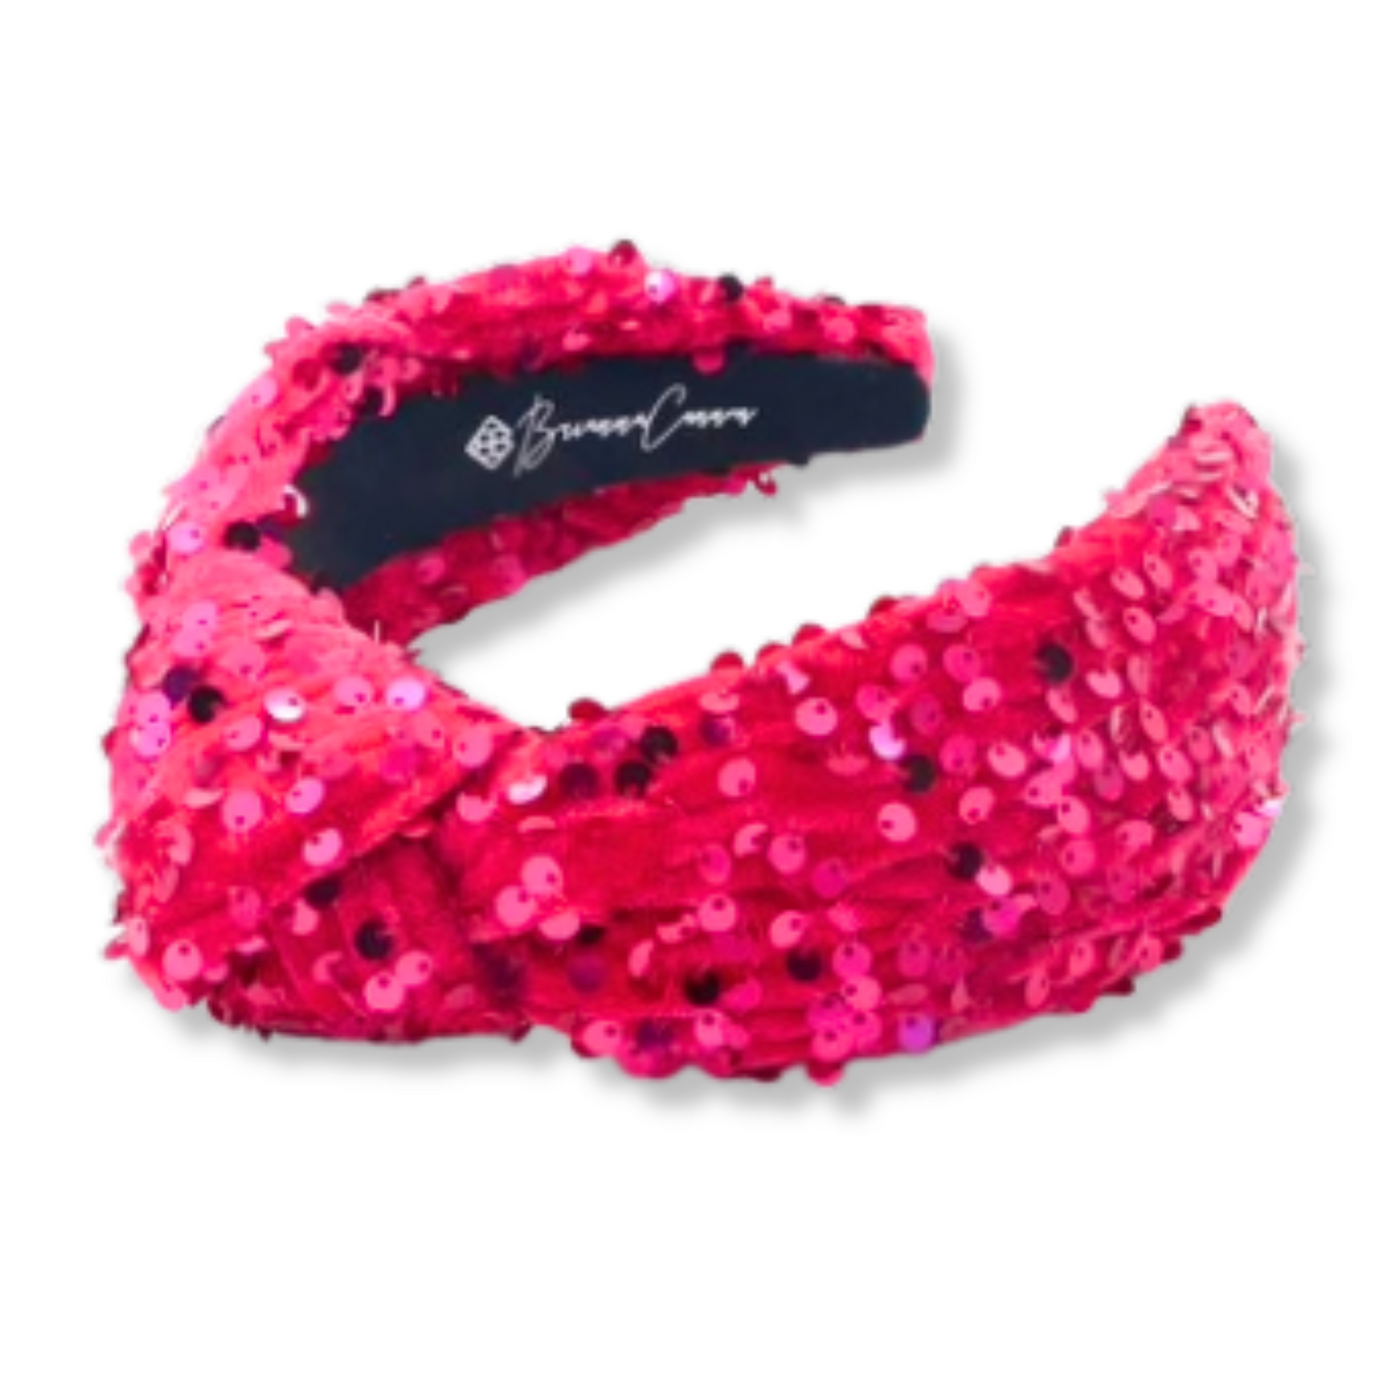 Adult Size Pink Sequin Knotted Headband